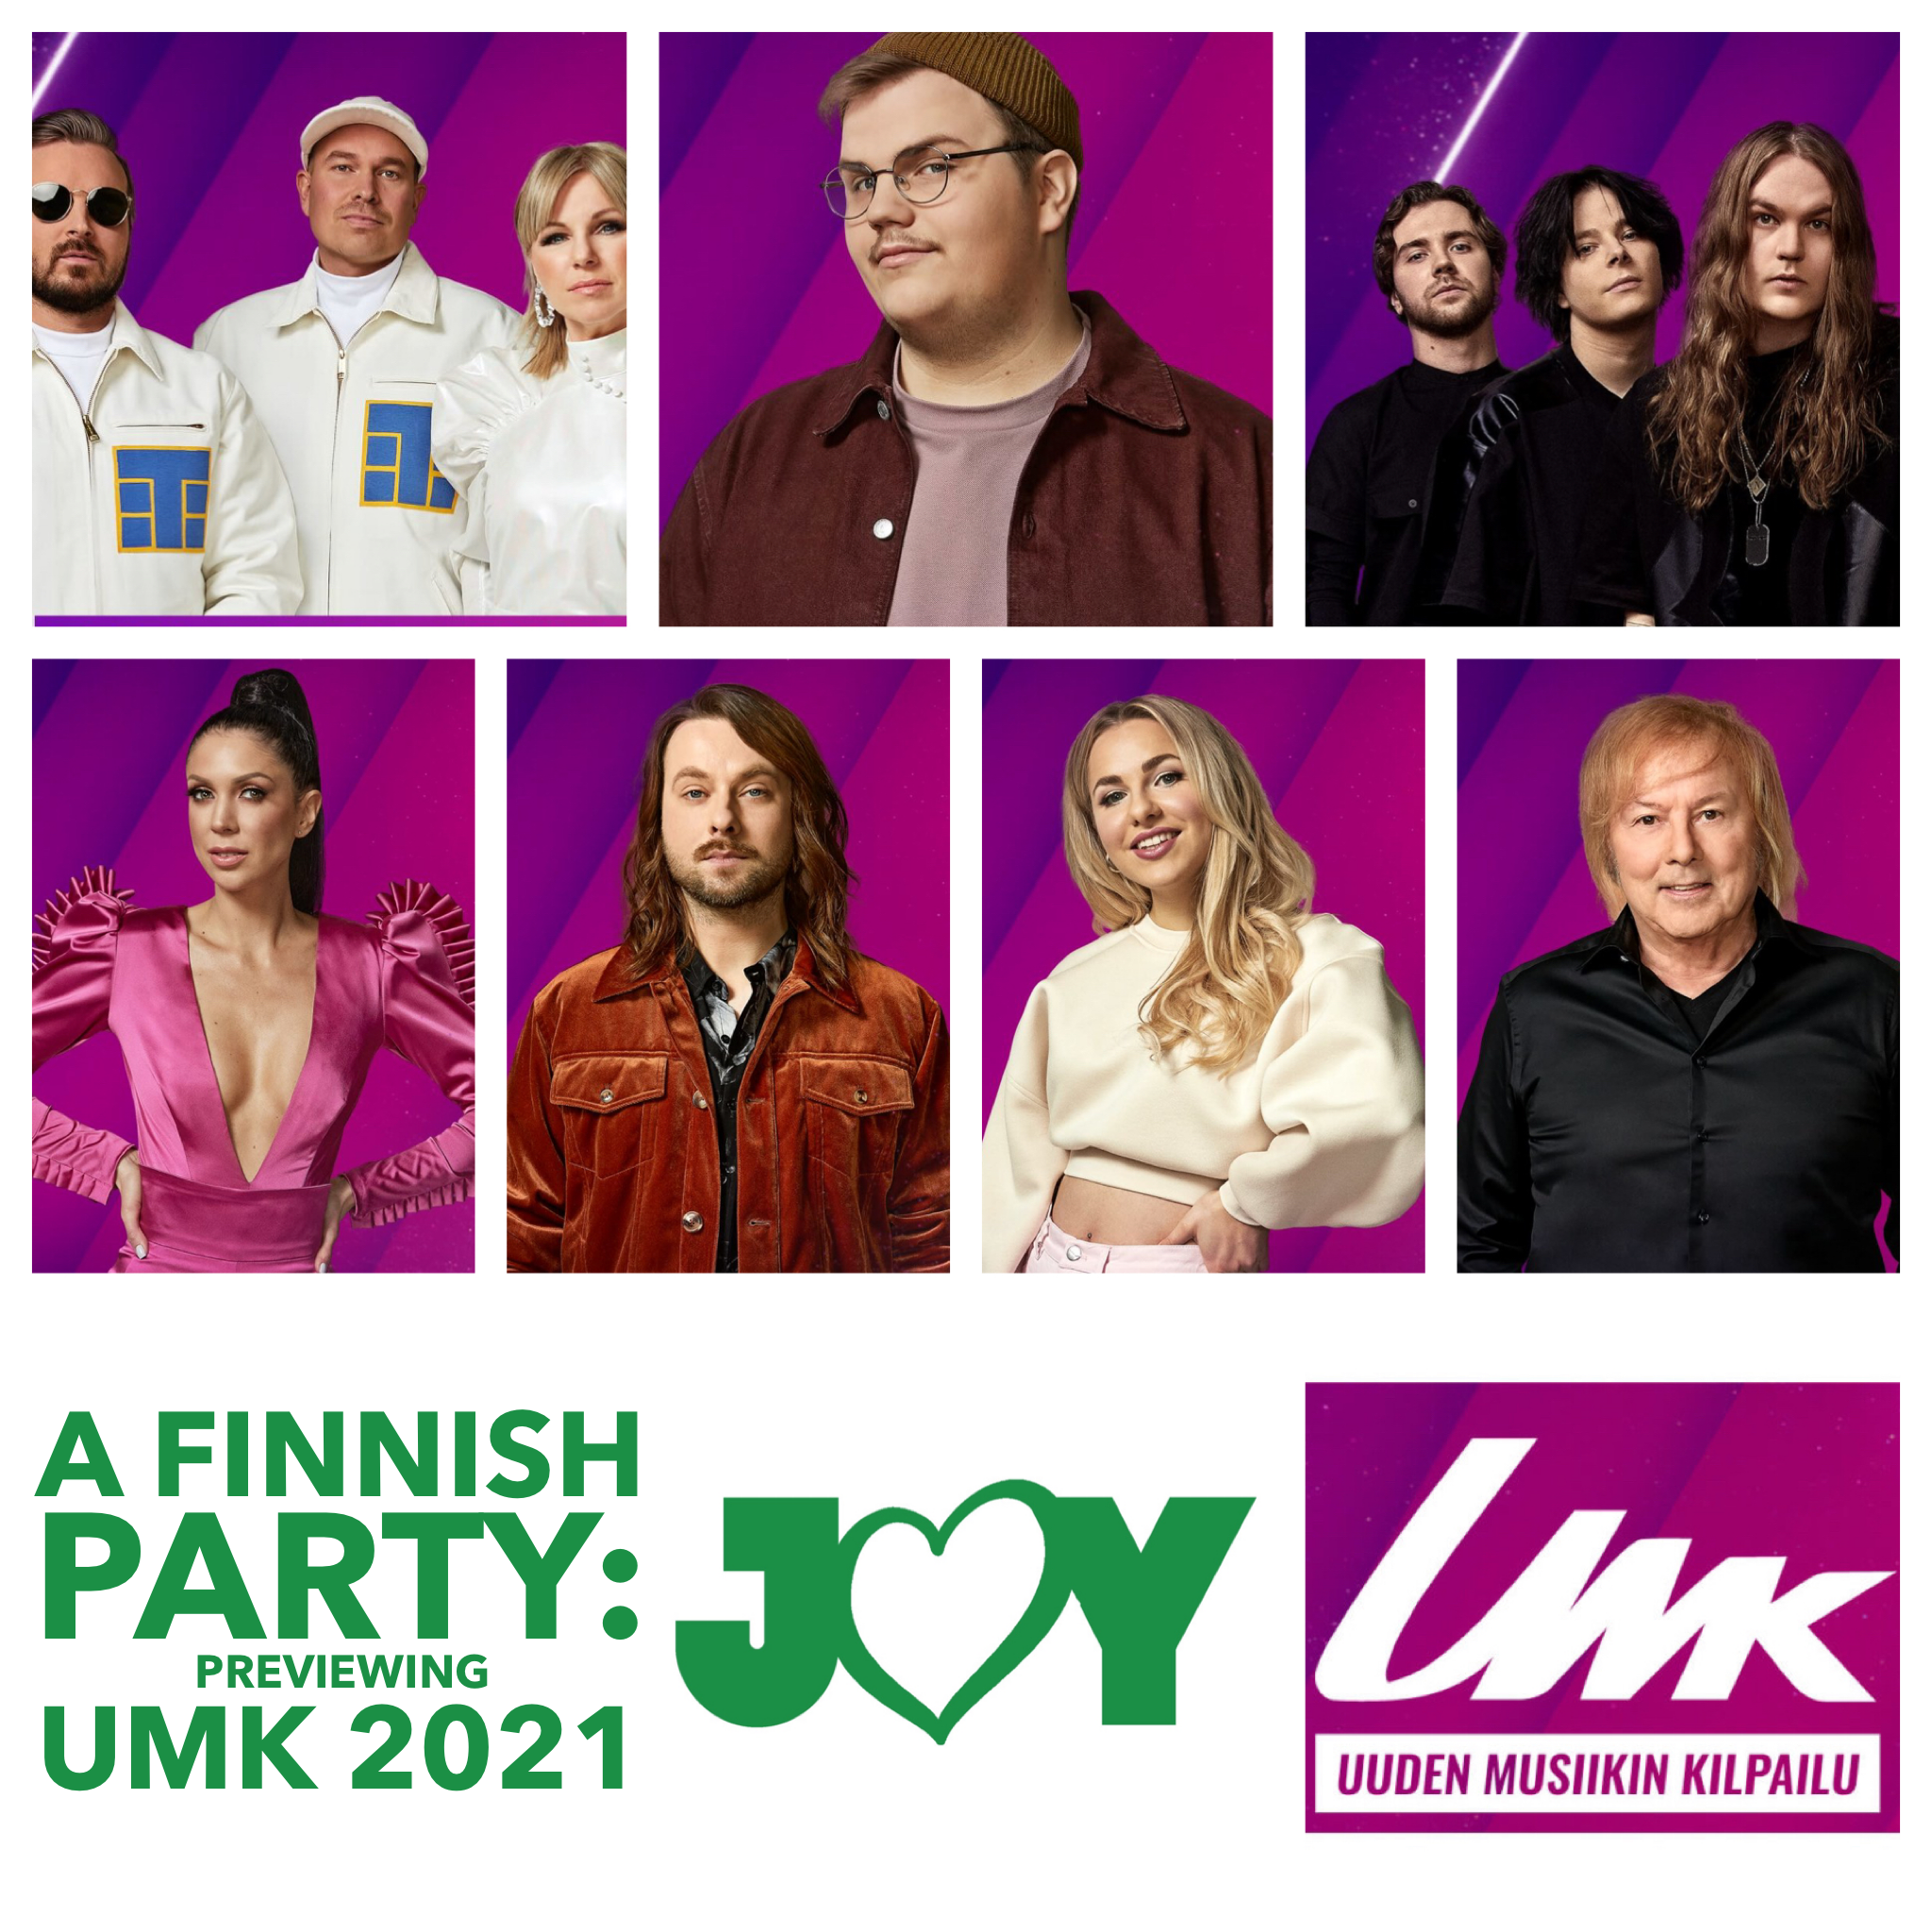 🇫🇮 A Finnish party: Previewing UMK 2021